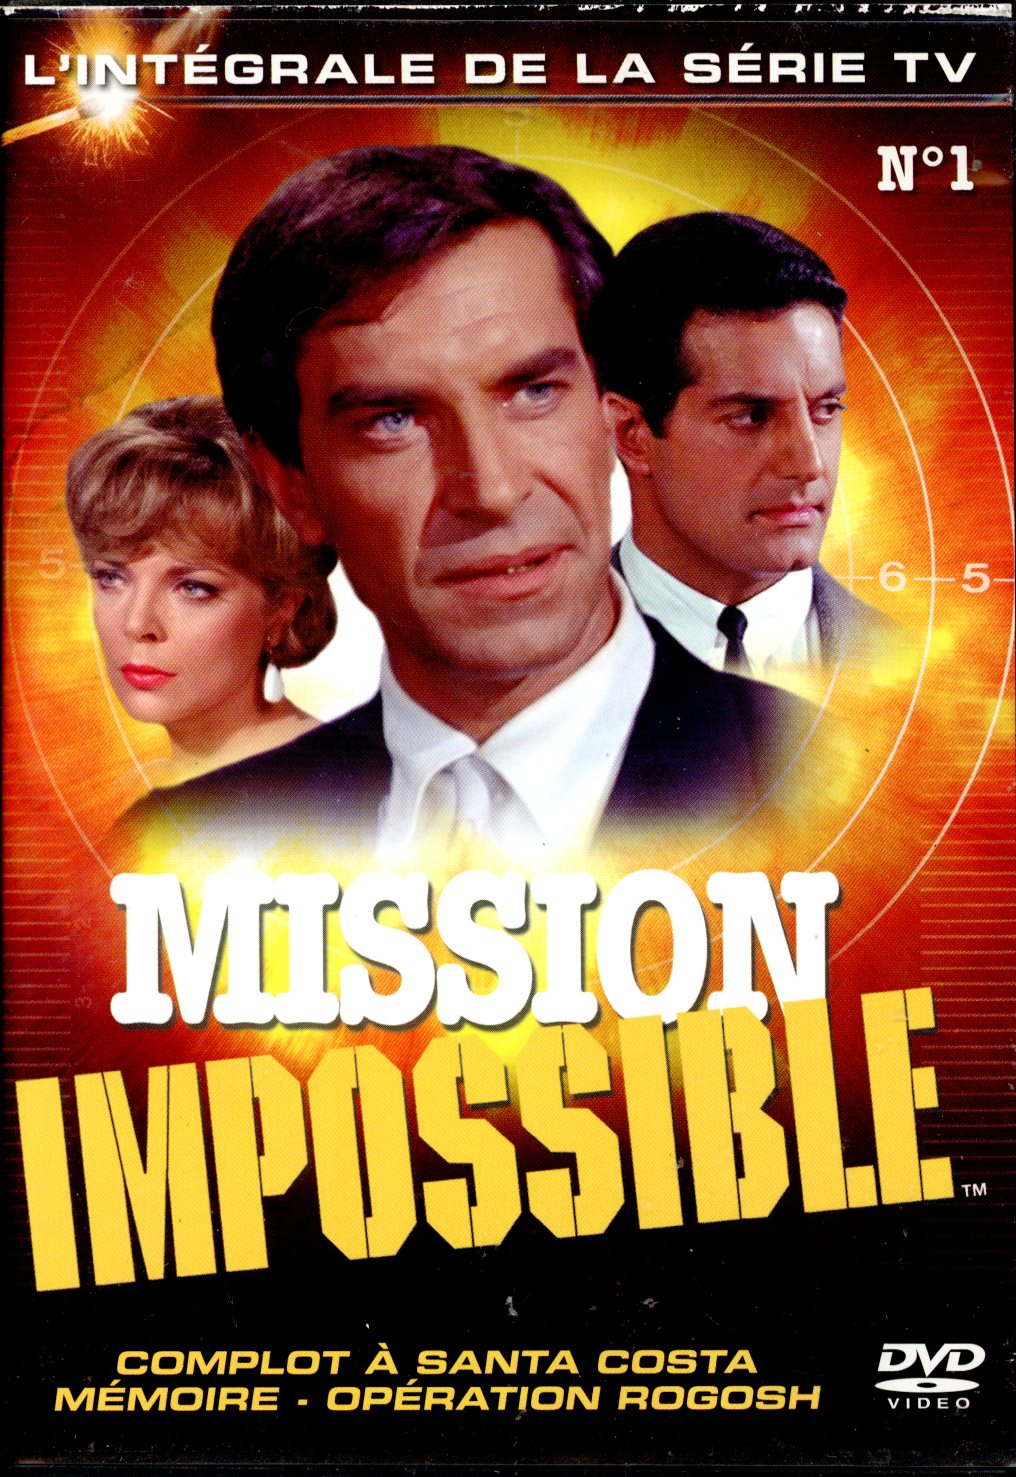 MISSION IMPOSSIBLE SERIE TV